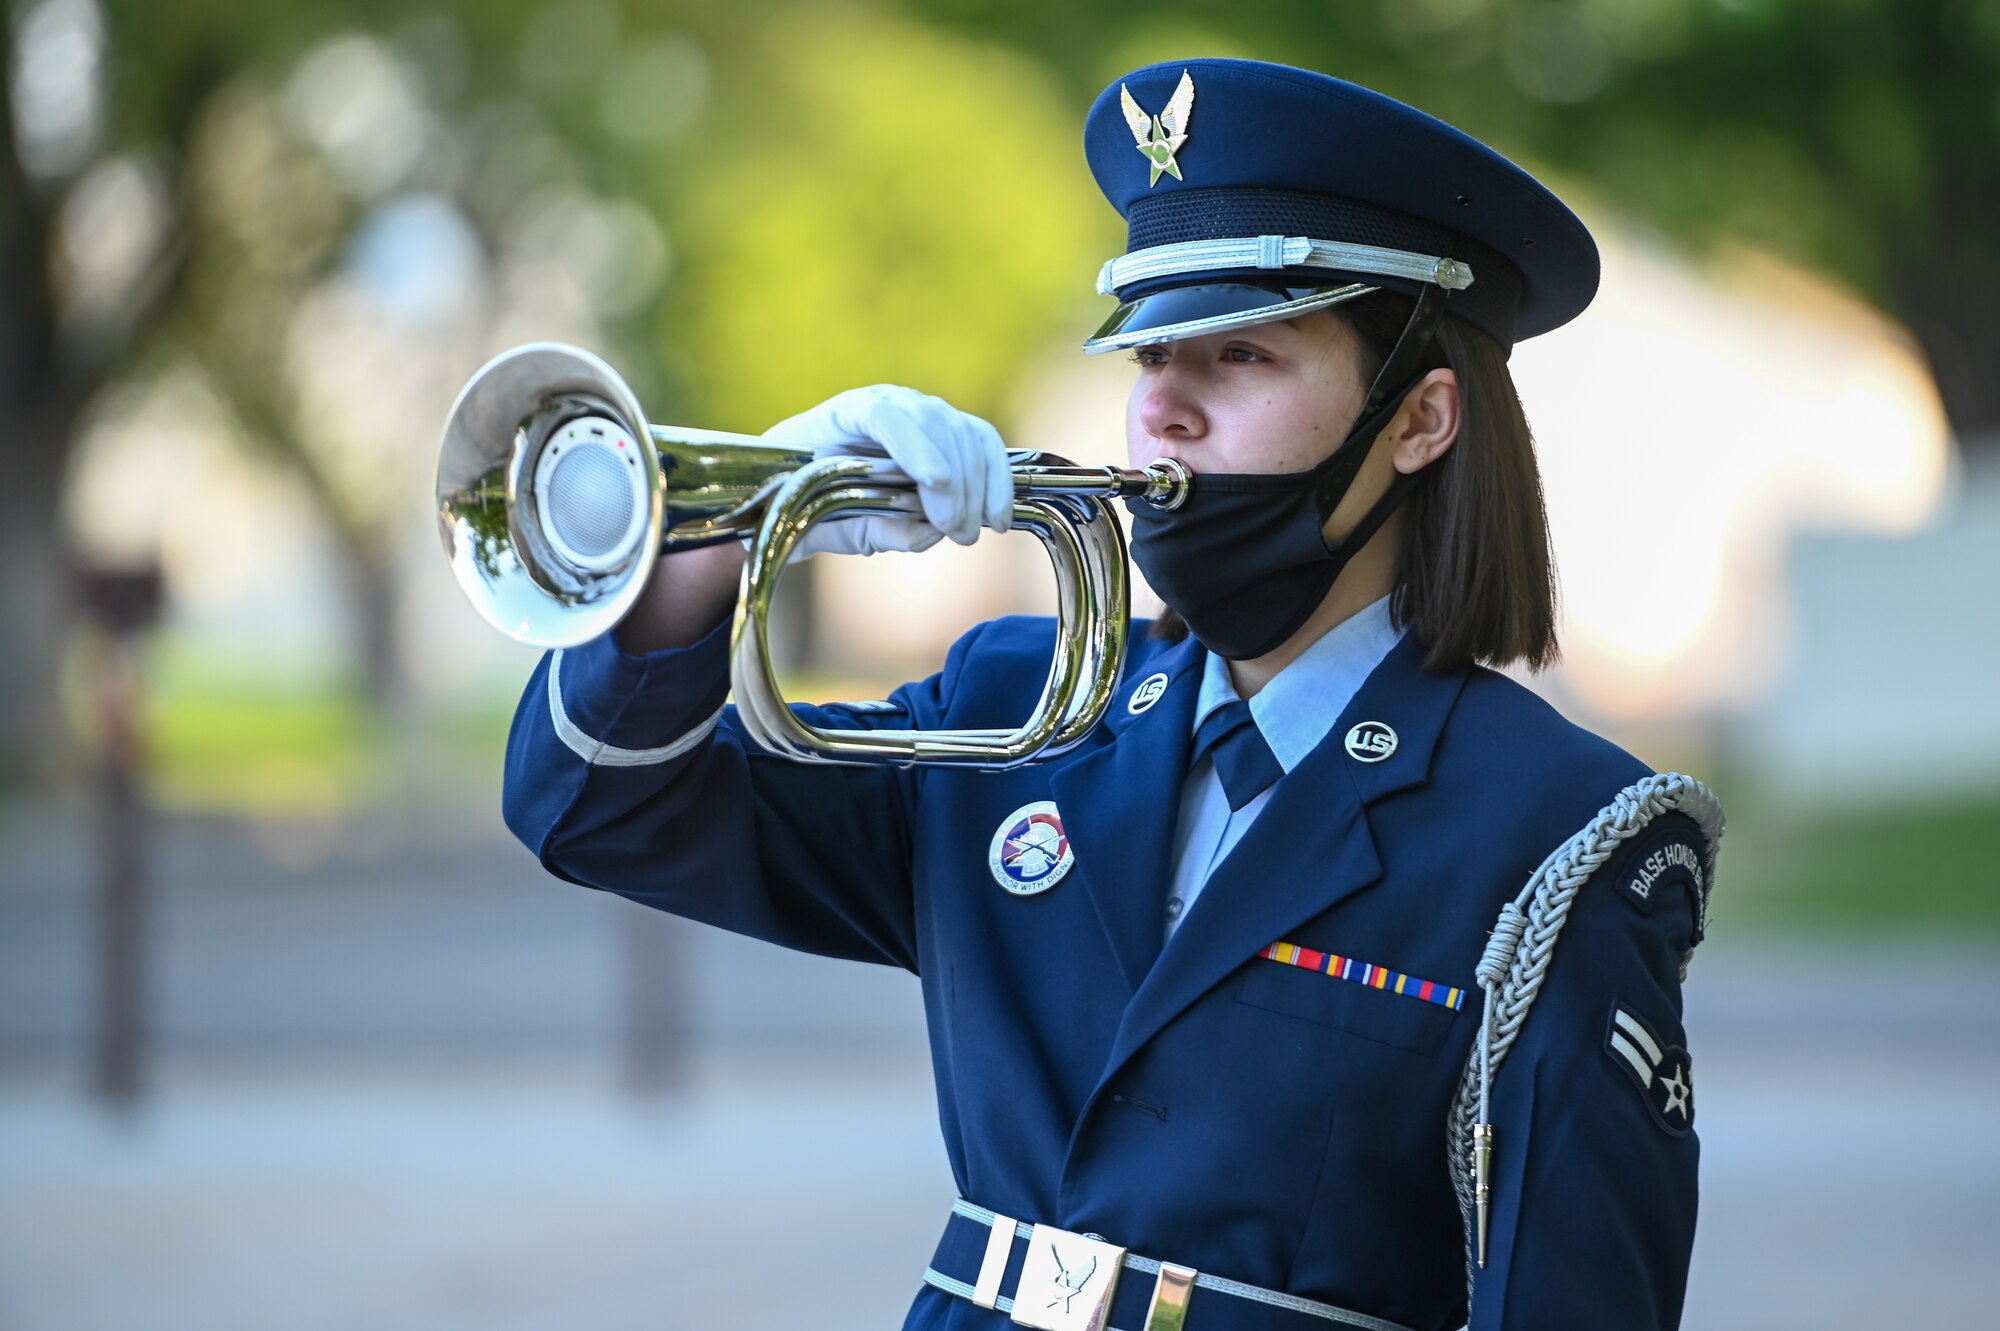 Airman 1st Class Tori Salem, base honor guard, "performs" taps during the POW/MIA ceremony Sept. 17, 2021, at Hill Air Force Base, Utah. The ceremony served to remember and honor those Americans who were prisoners of war and those who served and never returned home. (U.S. Air Force photo by Cynthia Griggs)